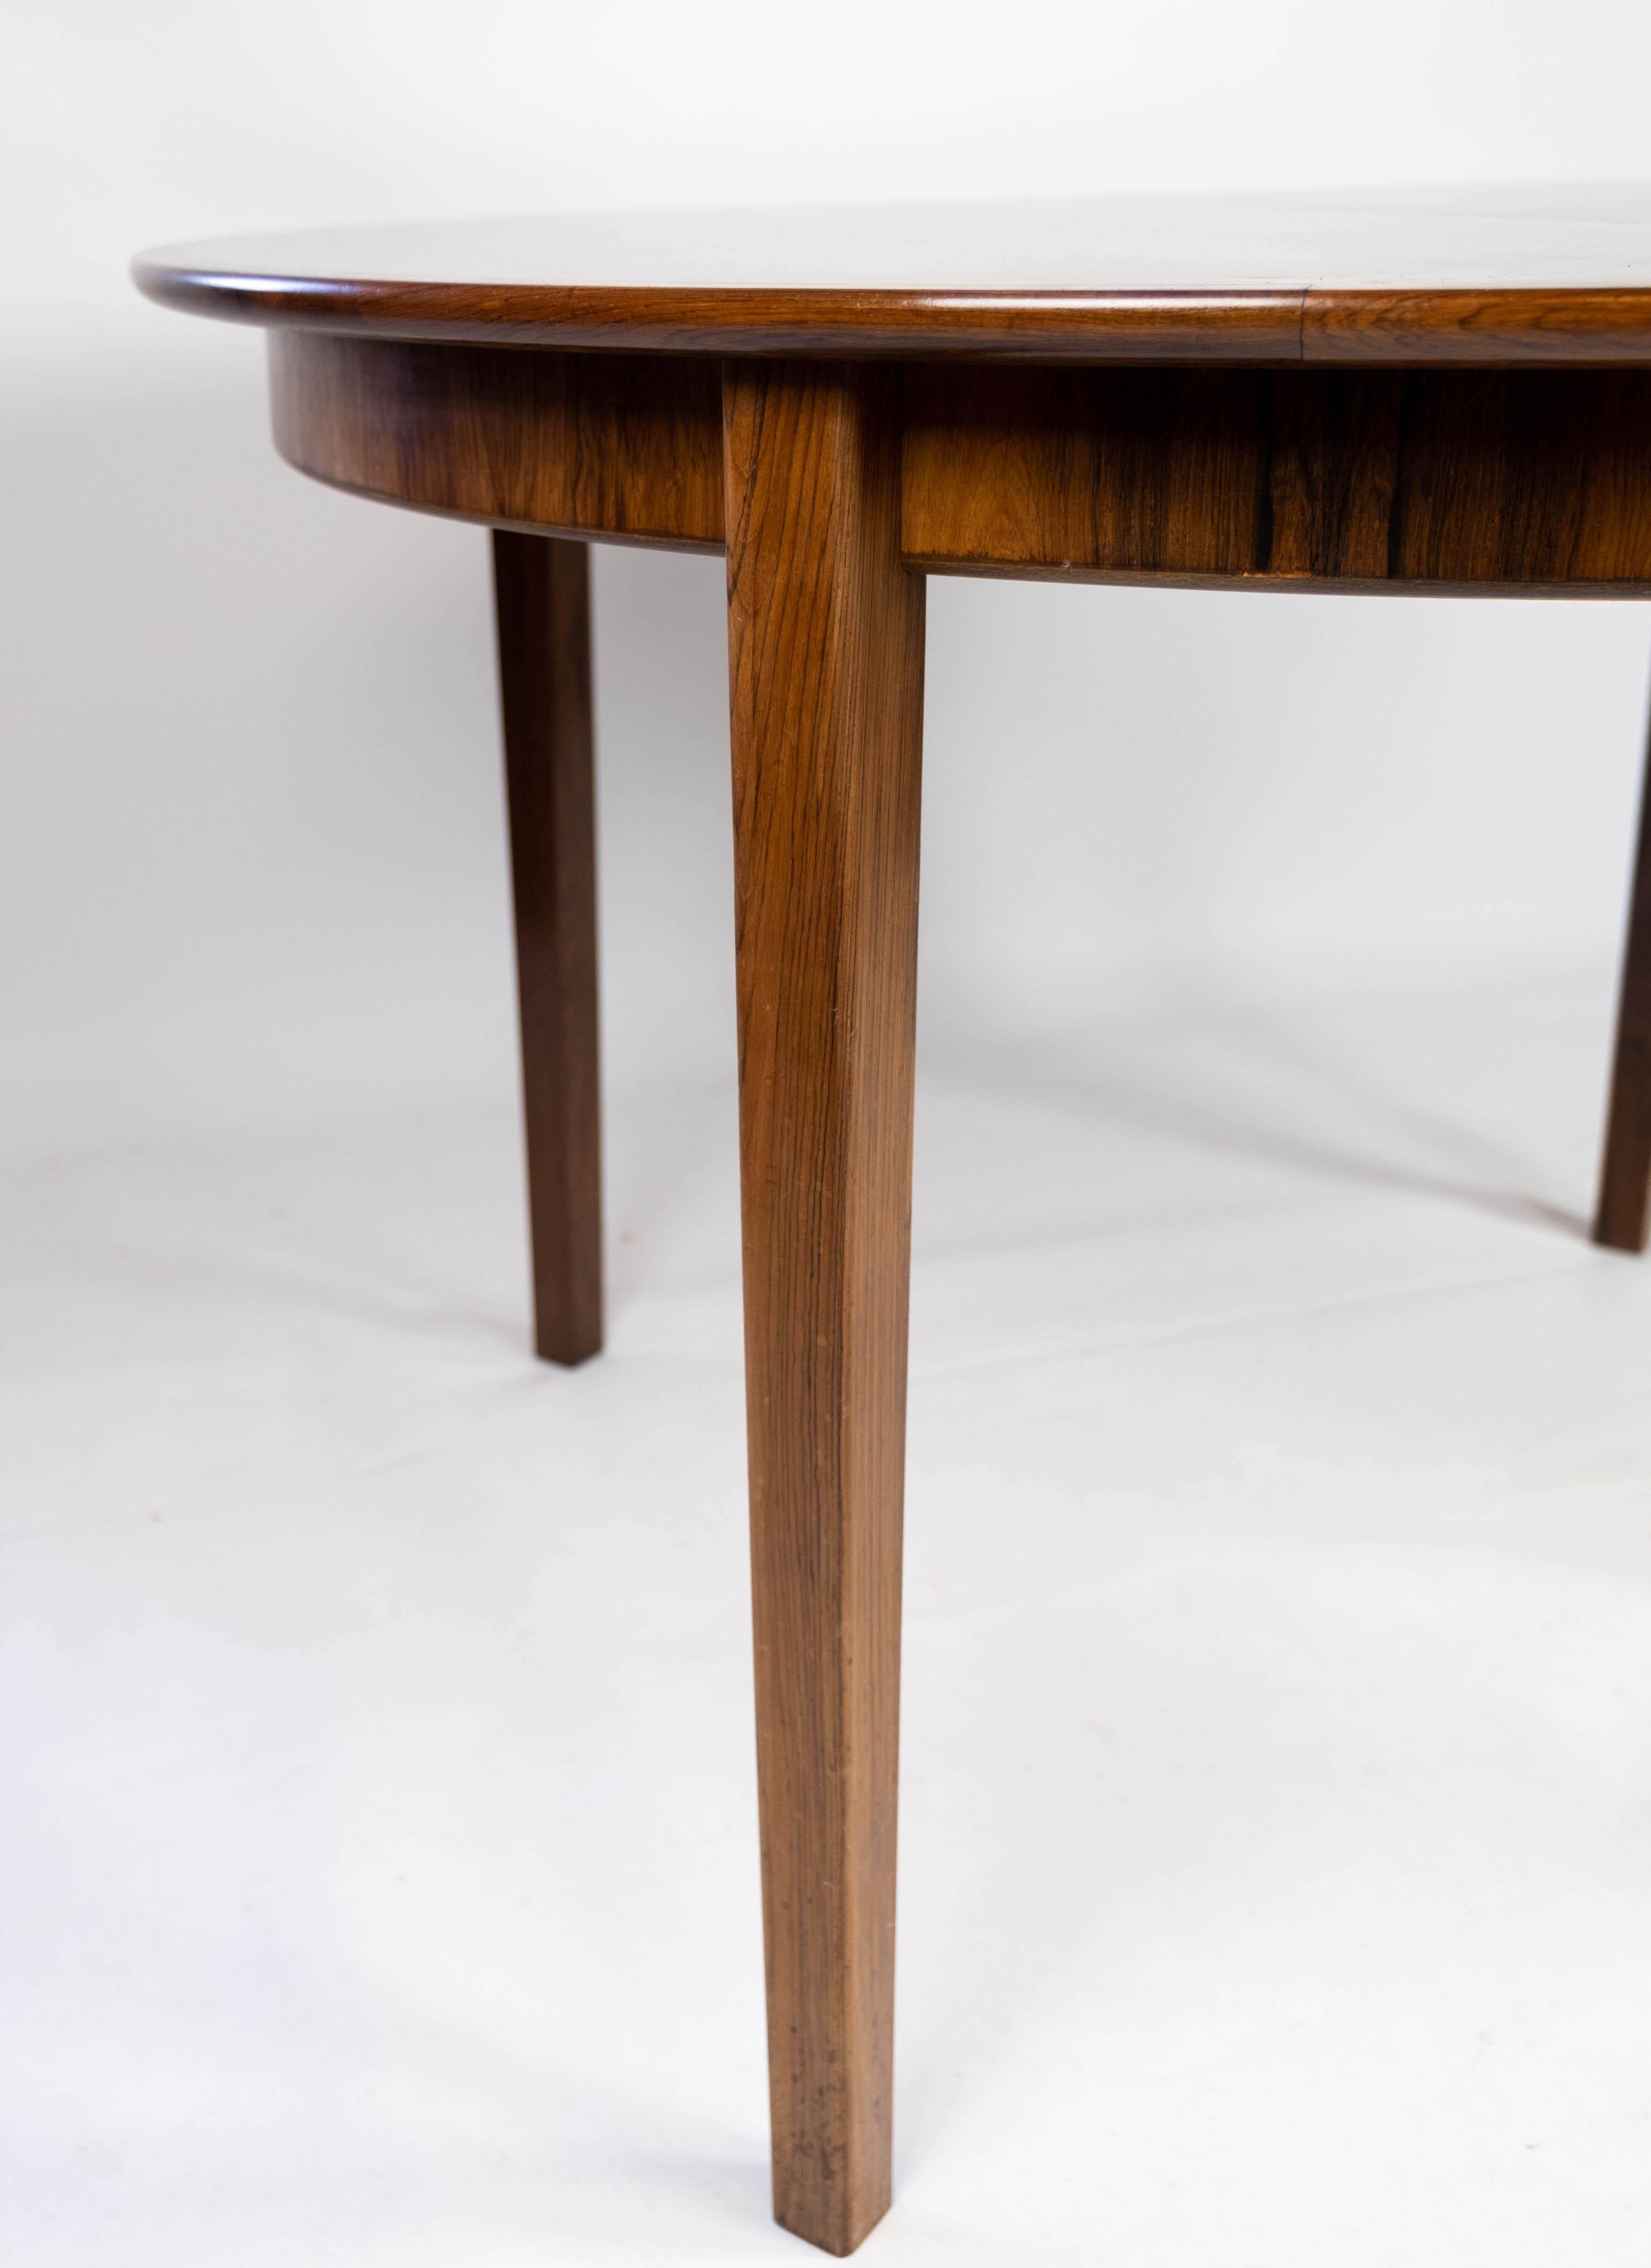 Dining Table Made In Rosewood With Extension Plates, Danish Design From 1960s In Good Condition For Sale In Lejre, DK